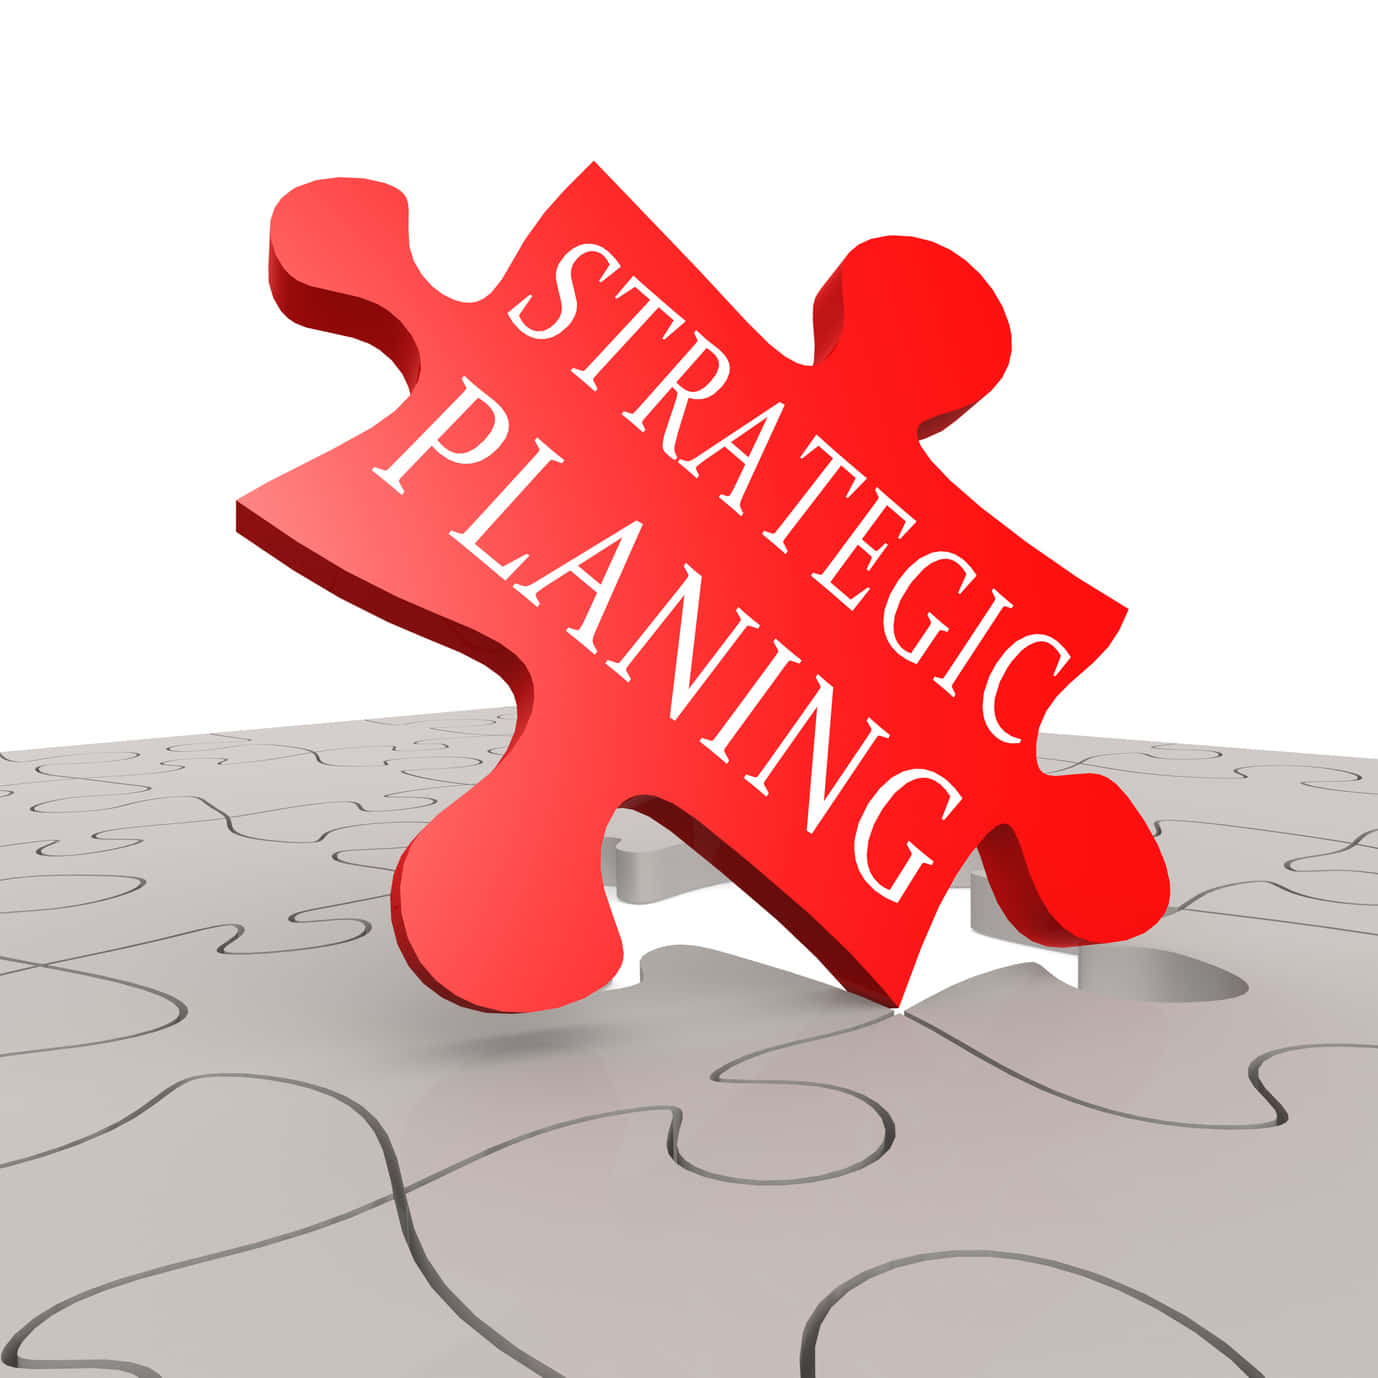 Strategic Planning - A Red Puzzle Piece